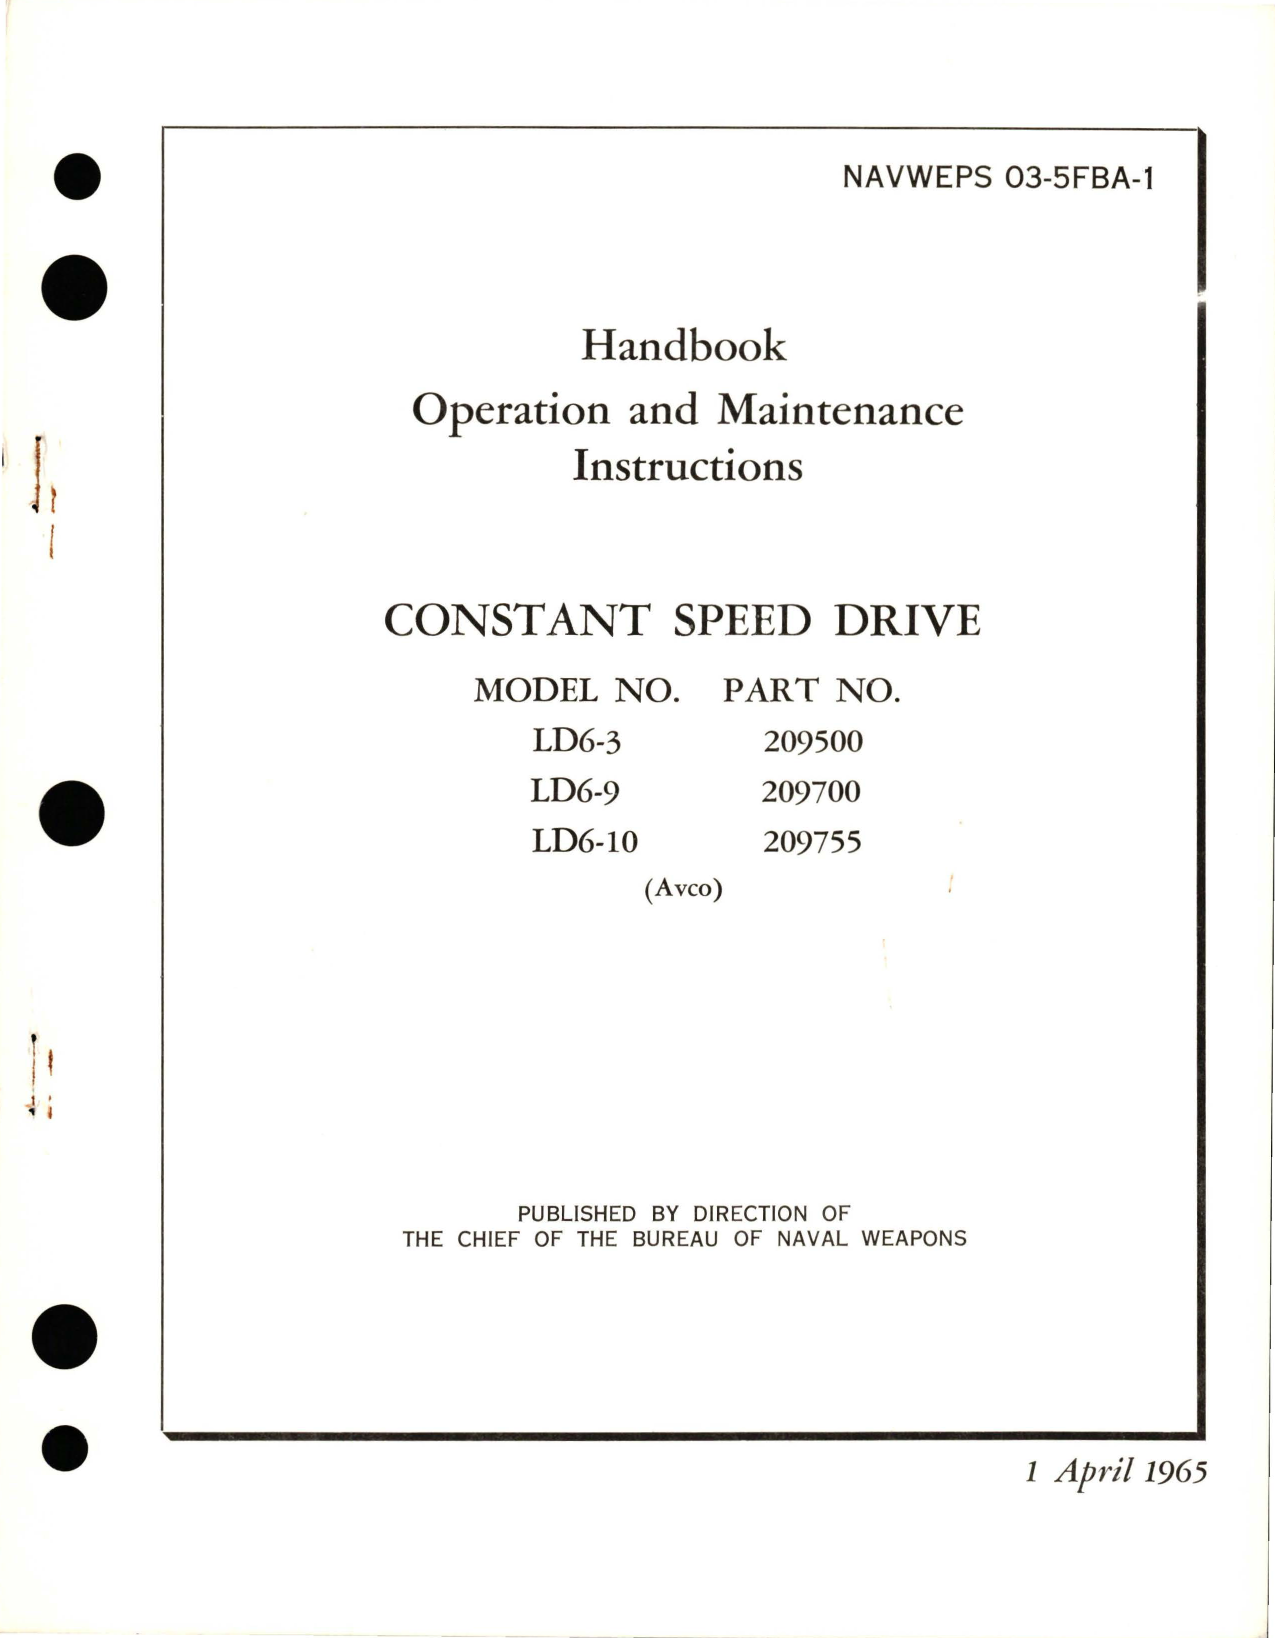 Sample page 1 from AirCorps Library document: Operation and Maintenance Instructions for Constant Speed Drive - Model LD6-3, LD6-9, and LD6-10